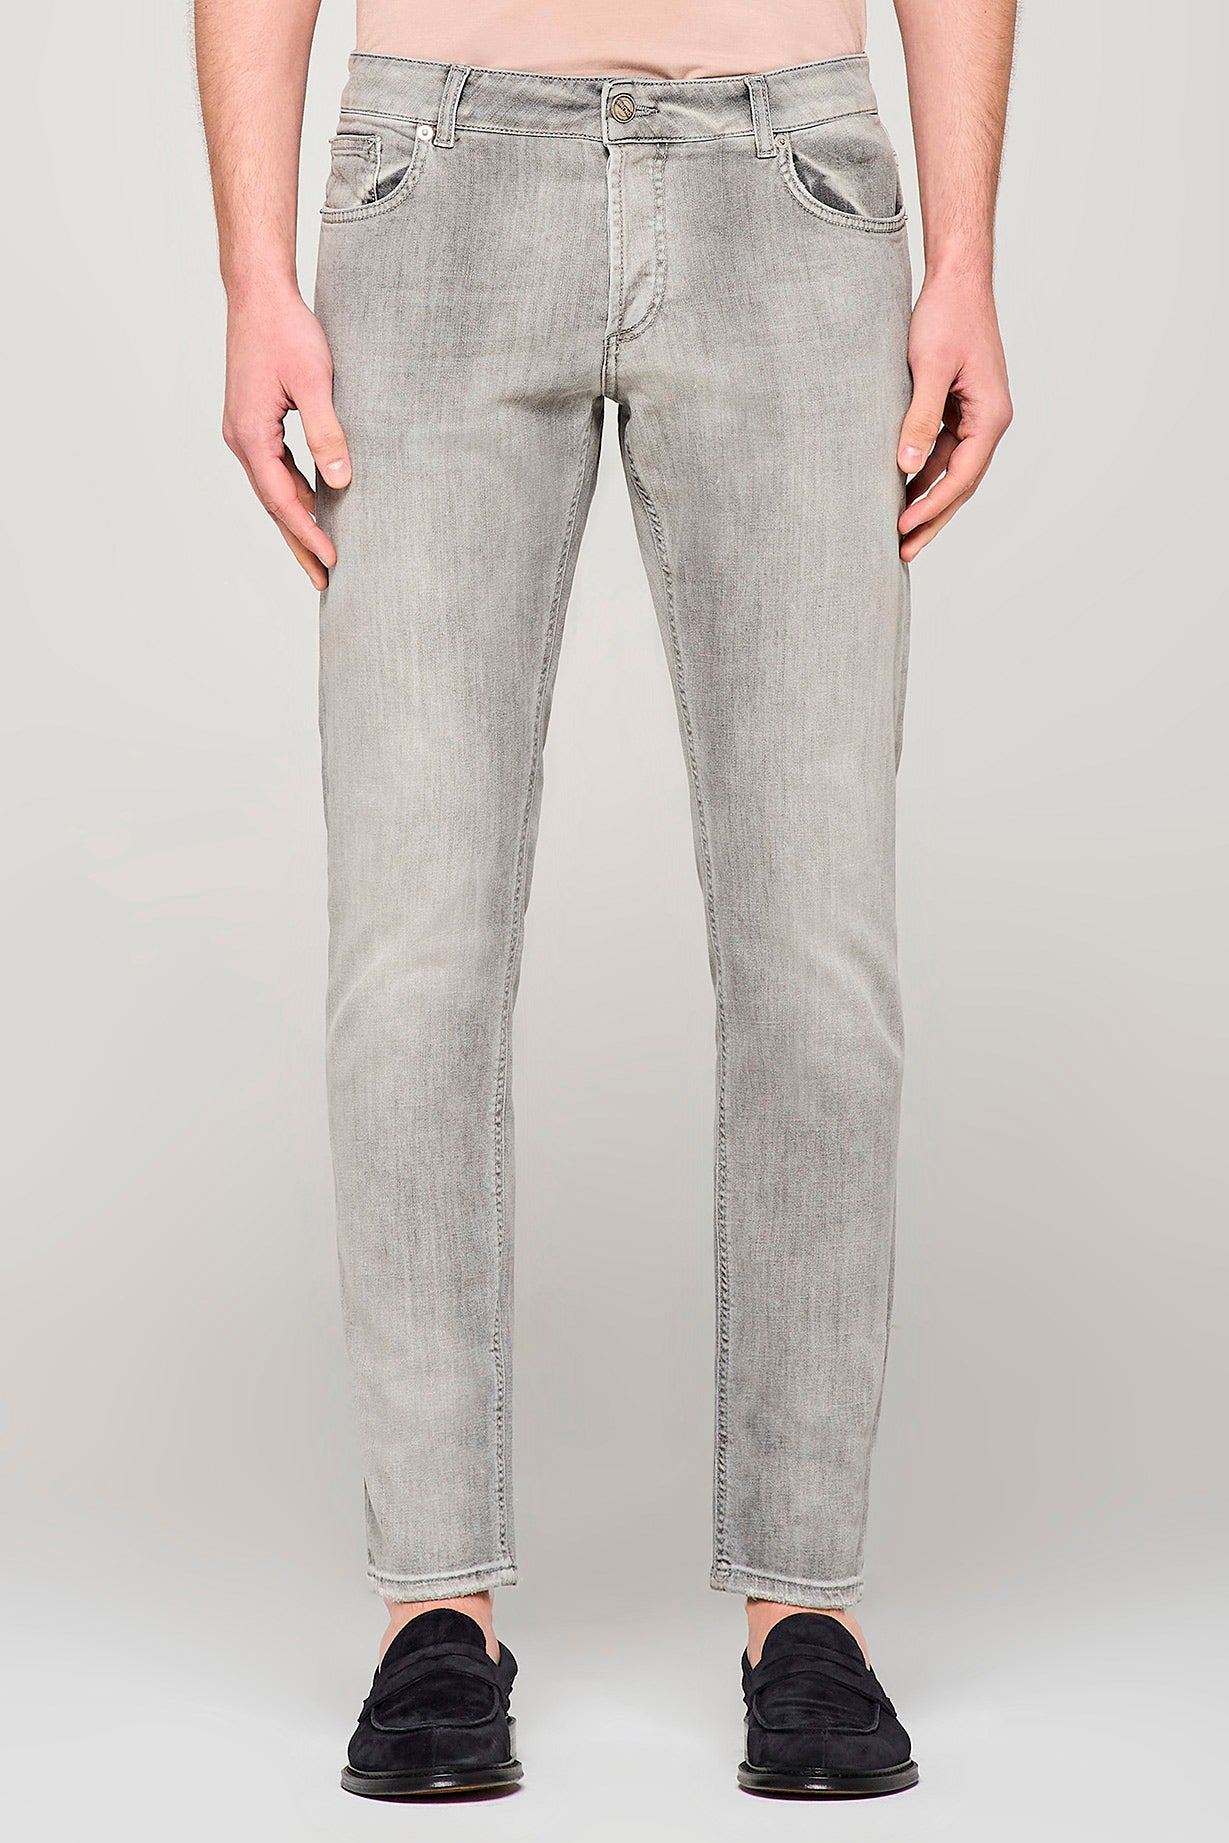 GREY WASHED JEANS